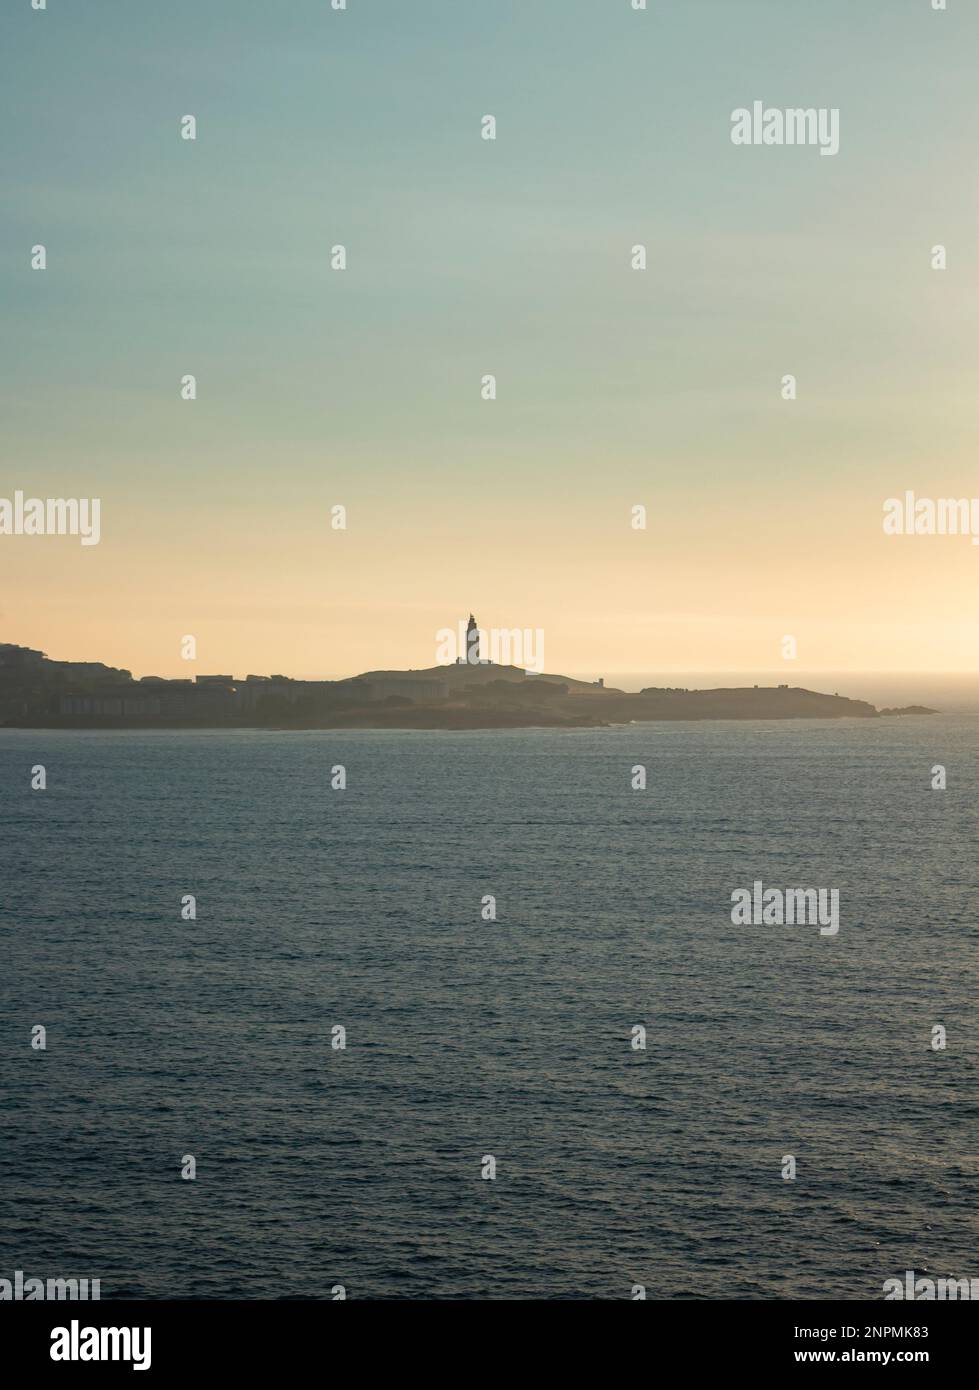 Tower of Hercules on the horizon, illuminated by the last rays of sunlight at sunset. Located in A Coruña, Galicia, and of historical interest, copy s Stock Photo